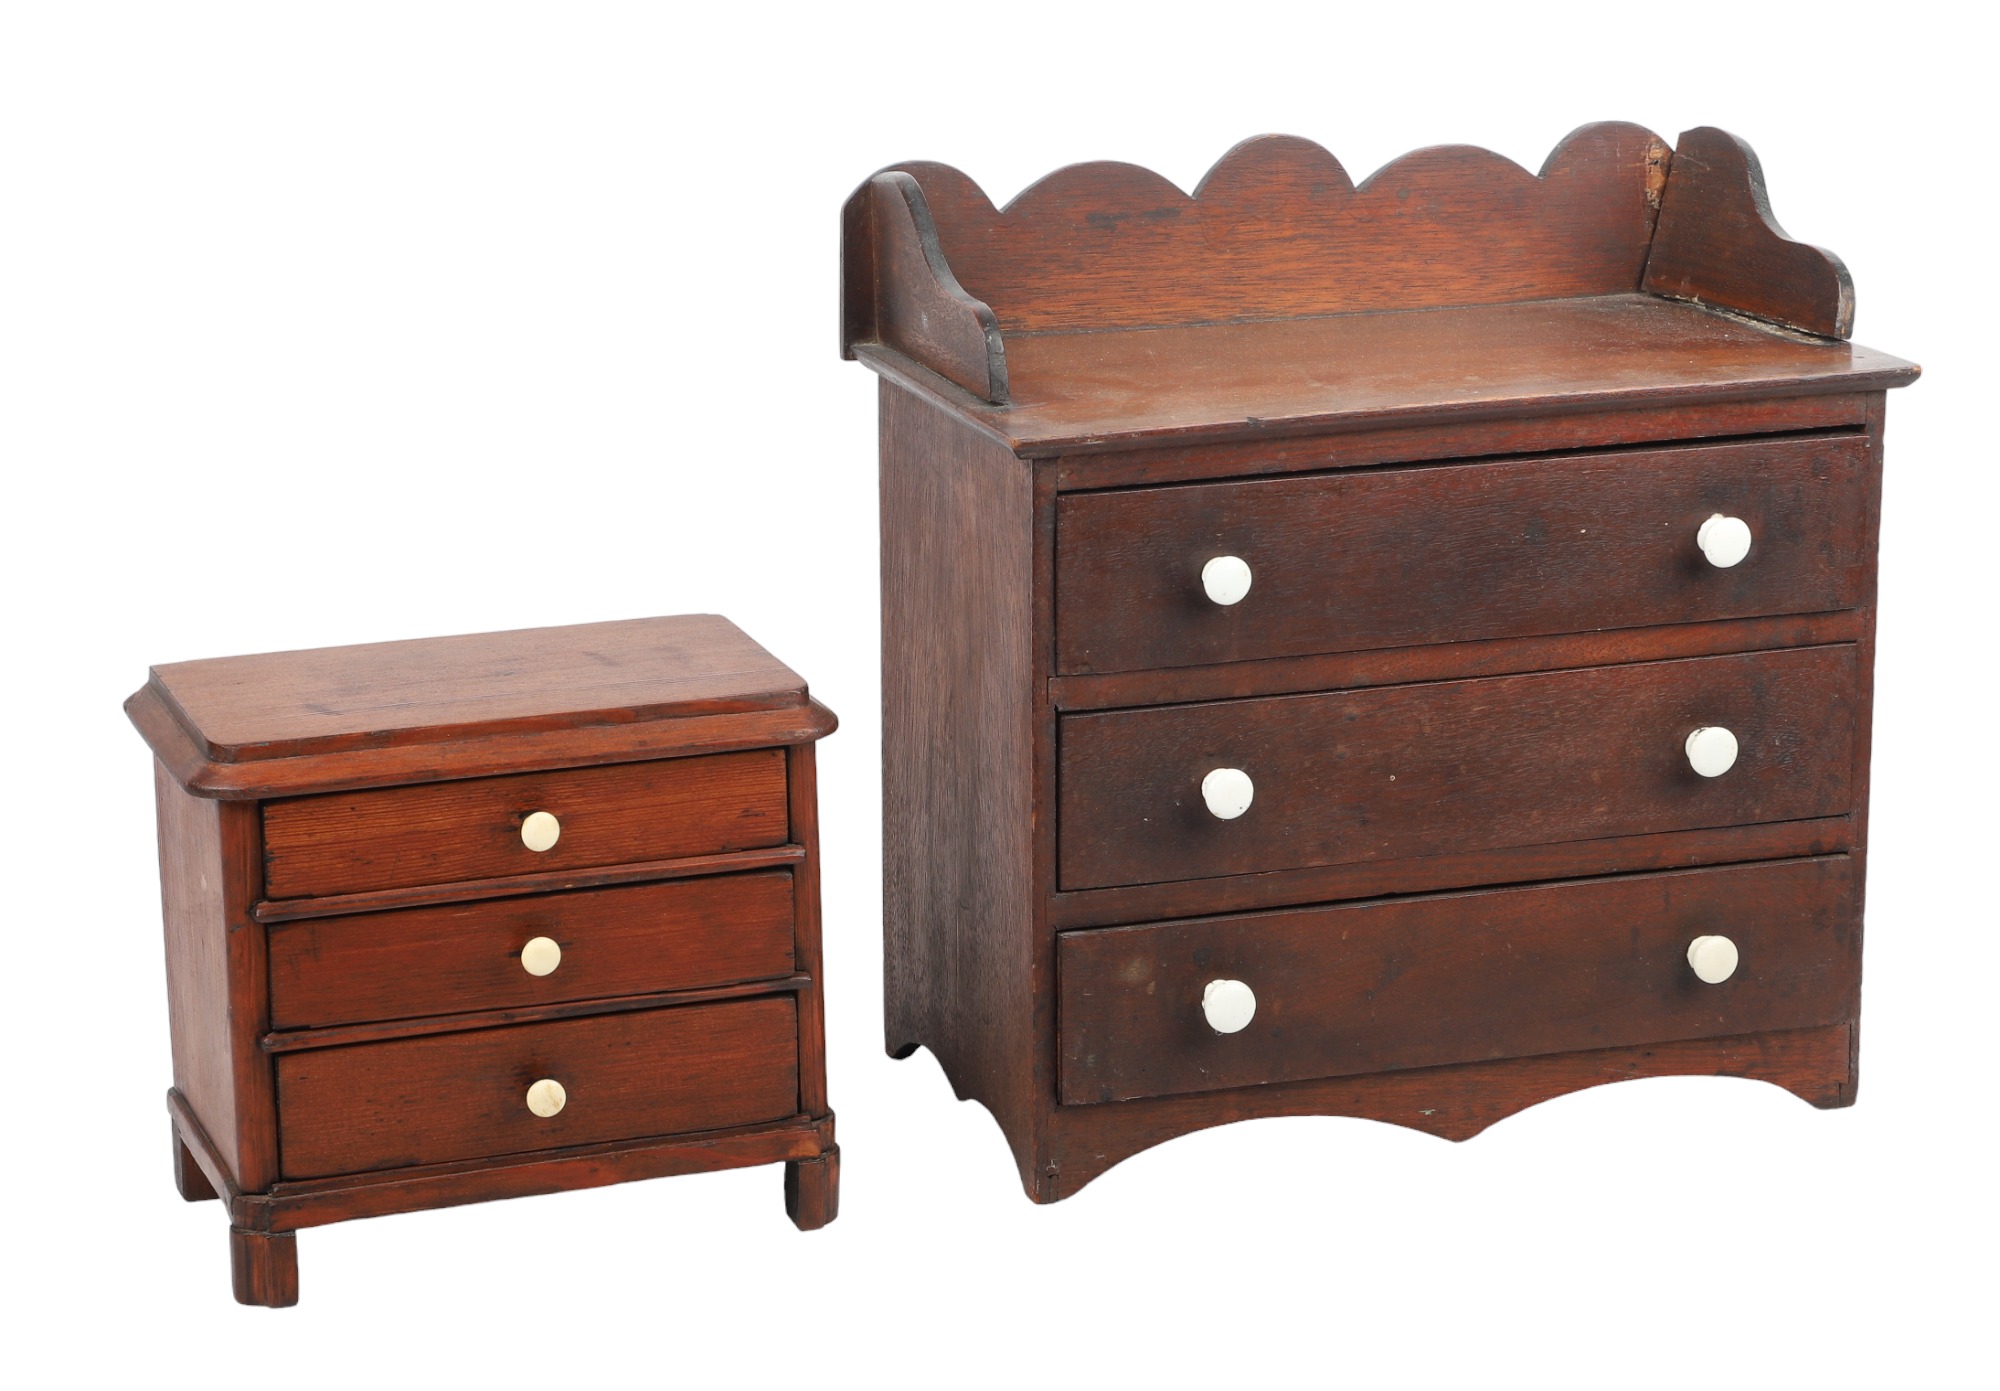  2 Pine 3 Drawer Miniature Chests  3ca4fd